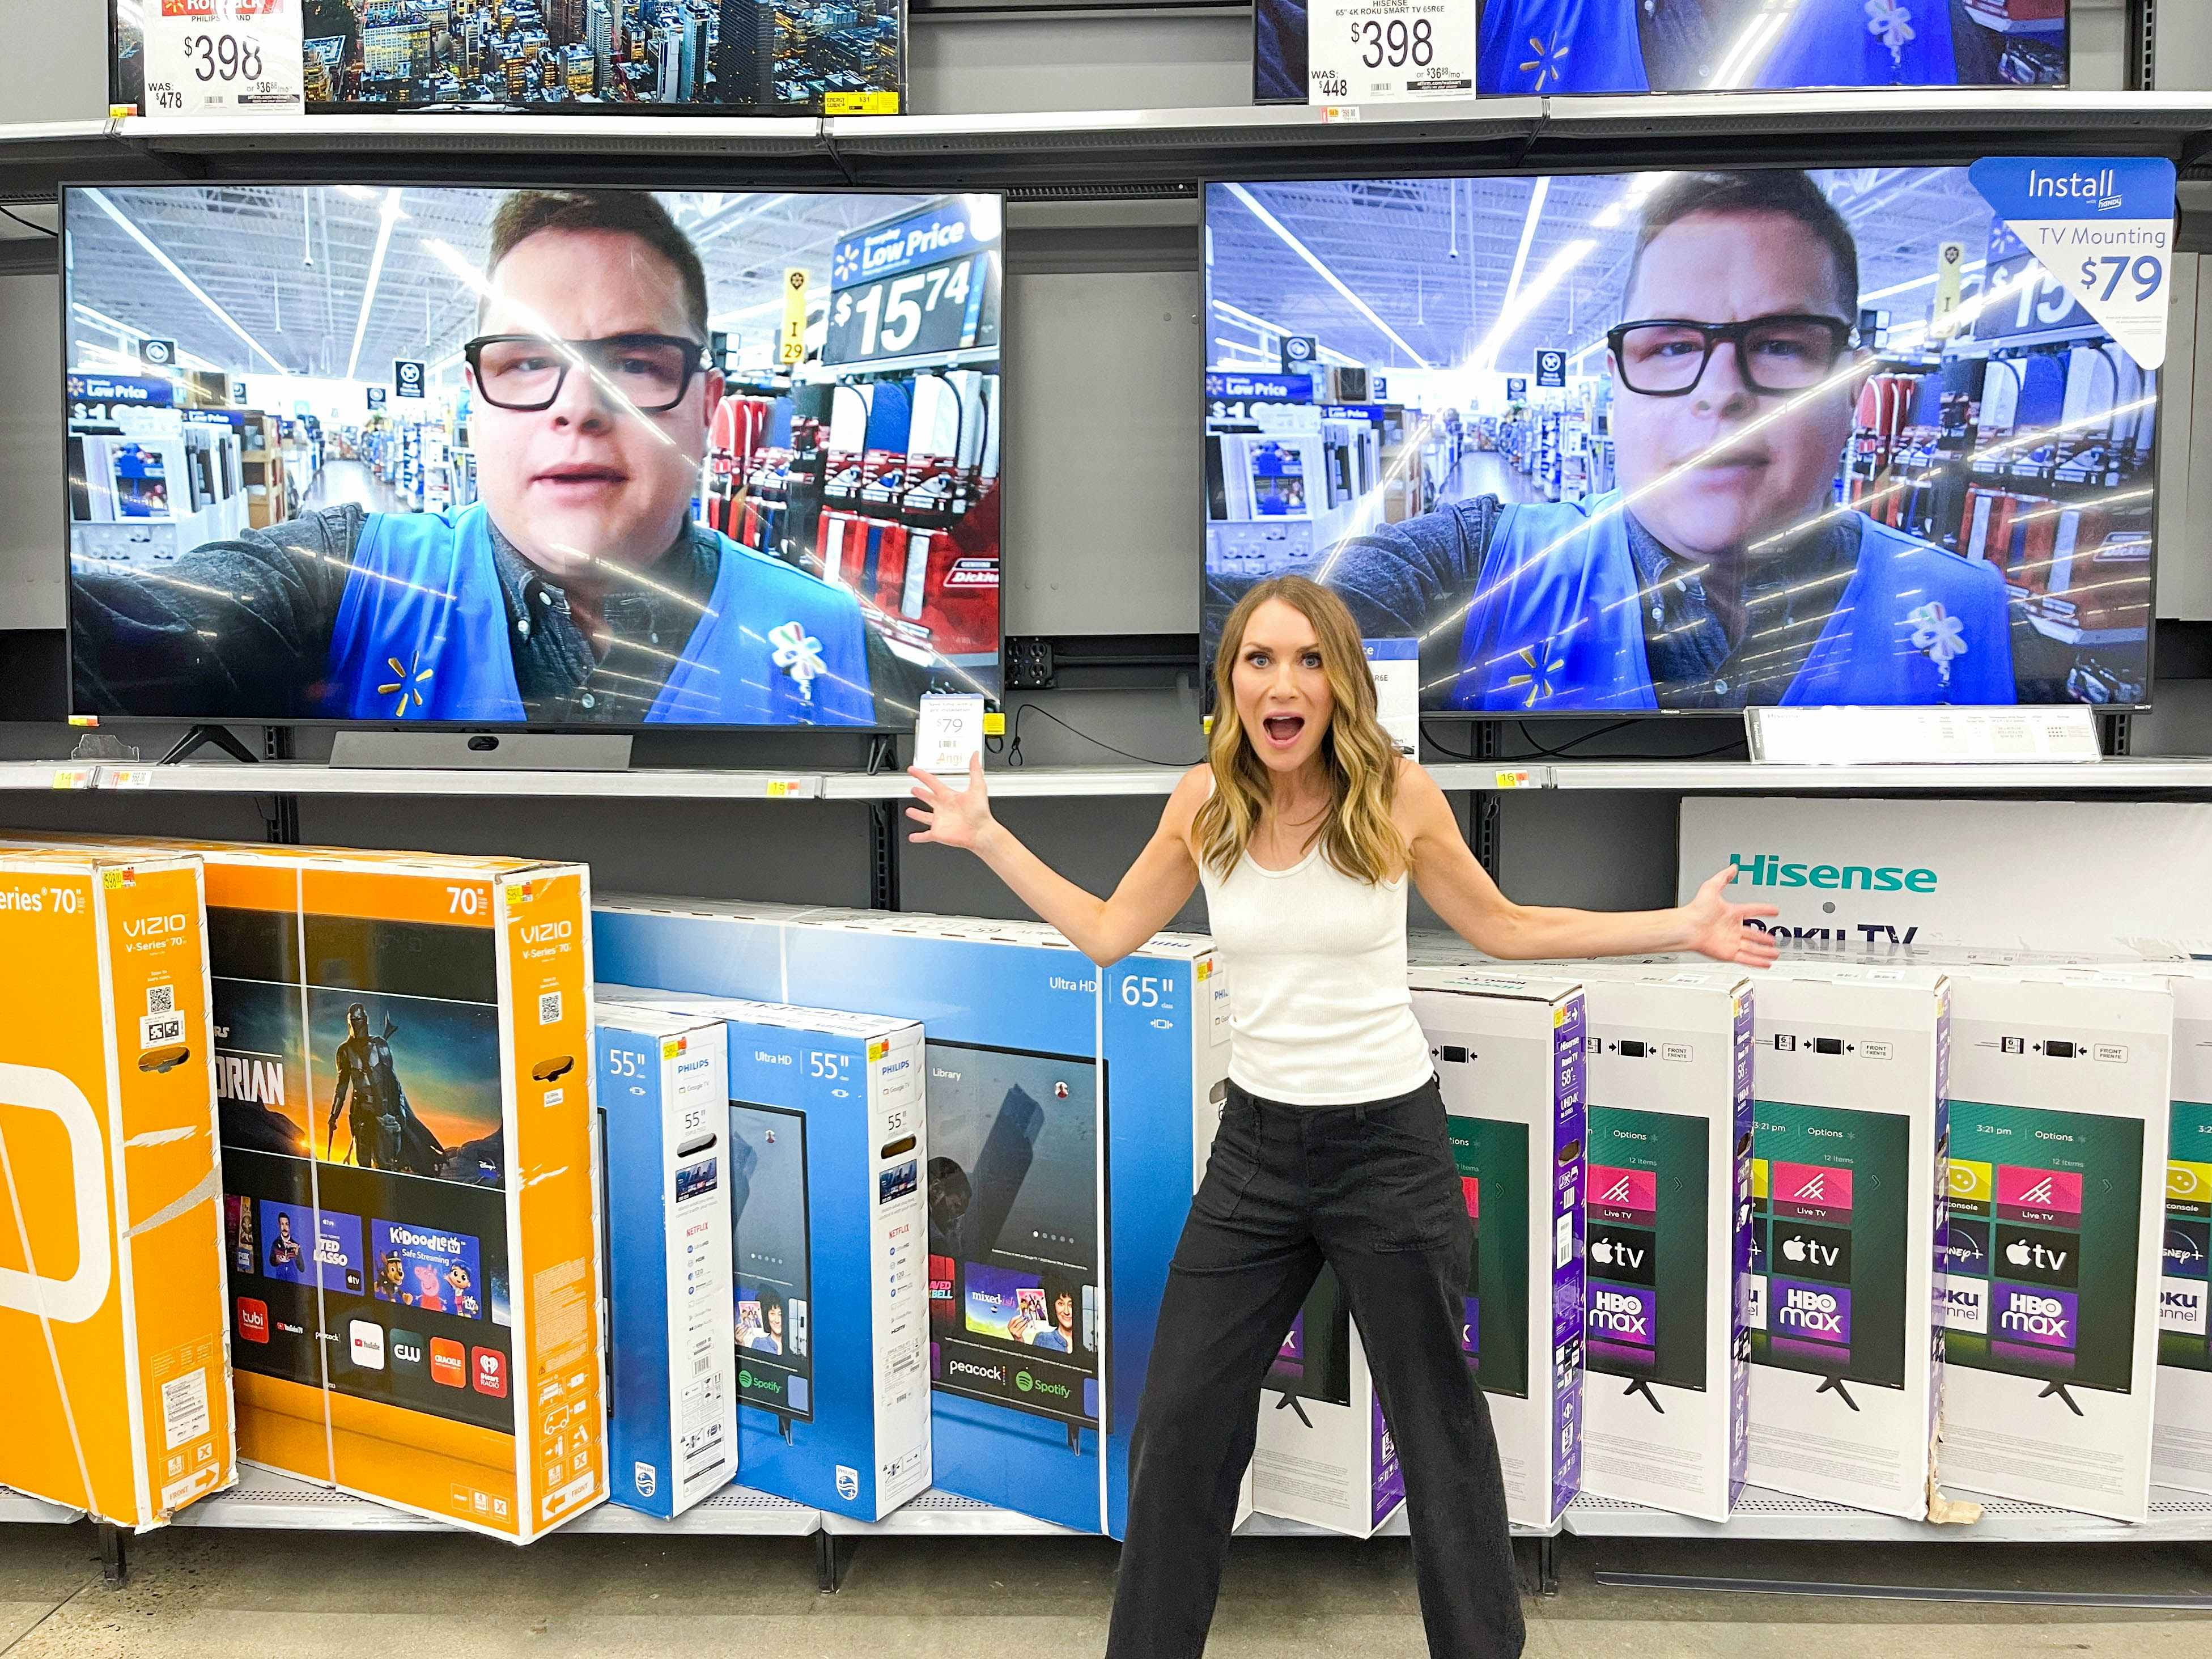 A woman standing in front of TVs on display at Walmart holding her phone and looking excited